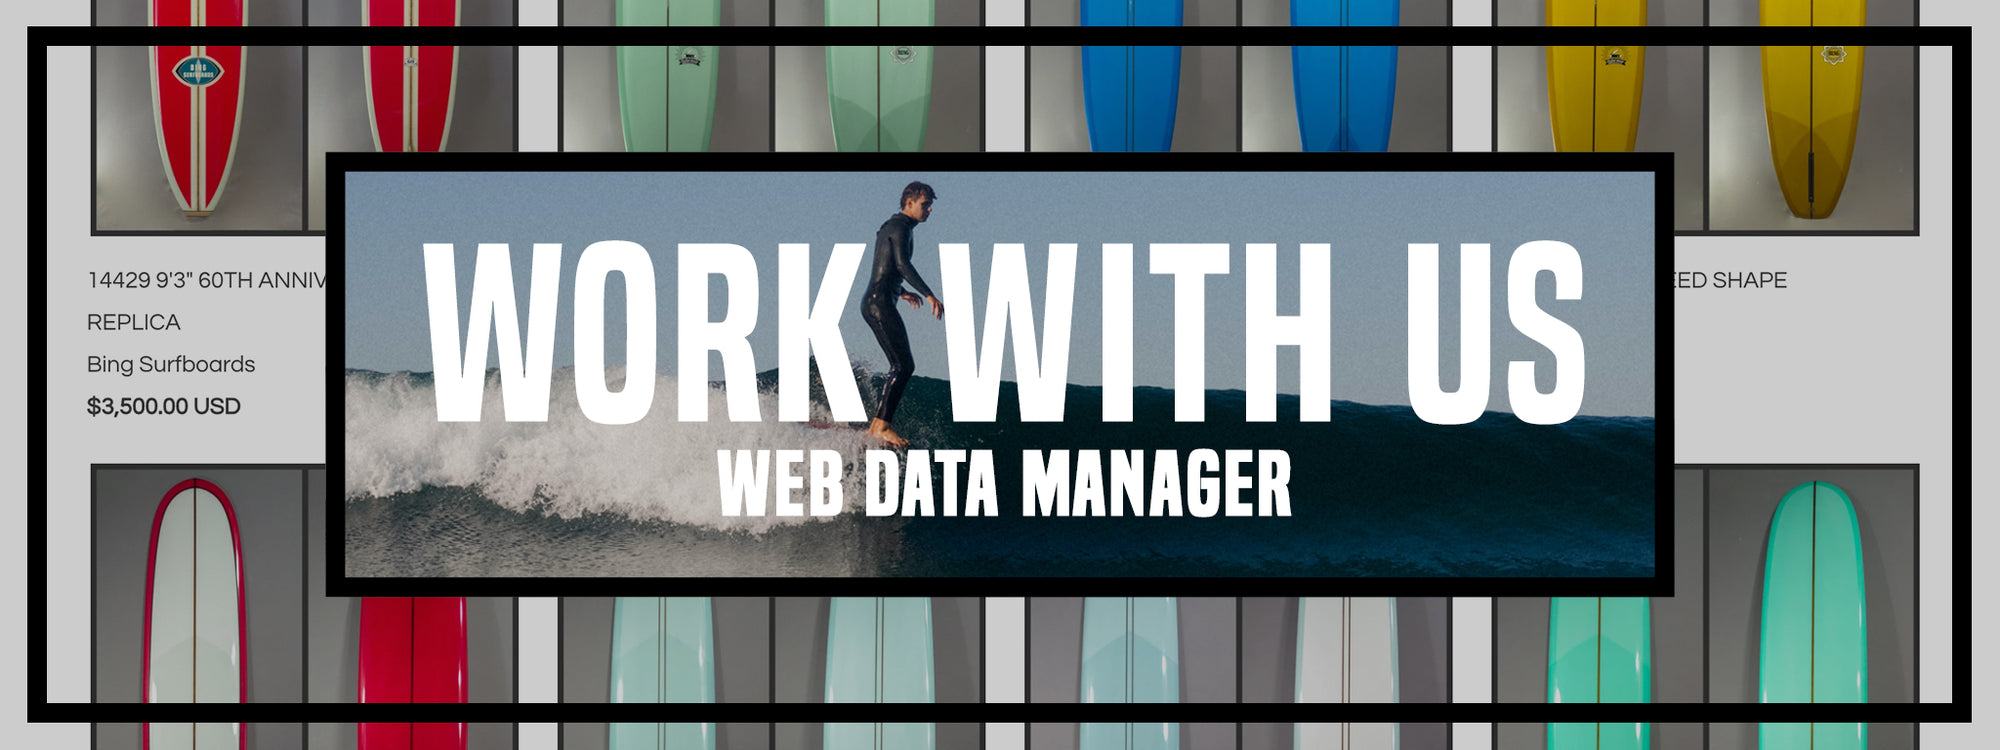 We Are Hiring! Web Data Manager